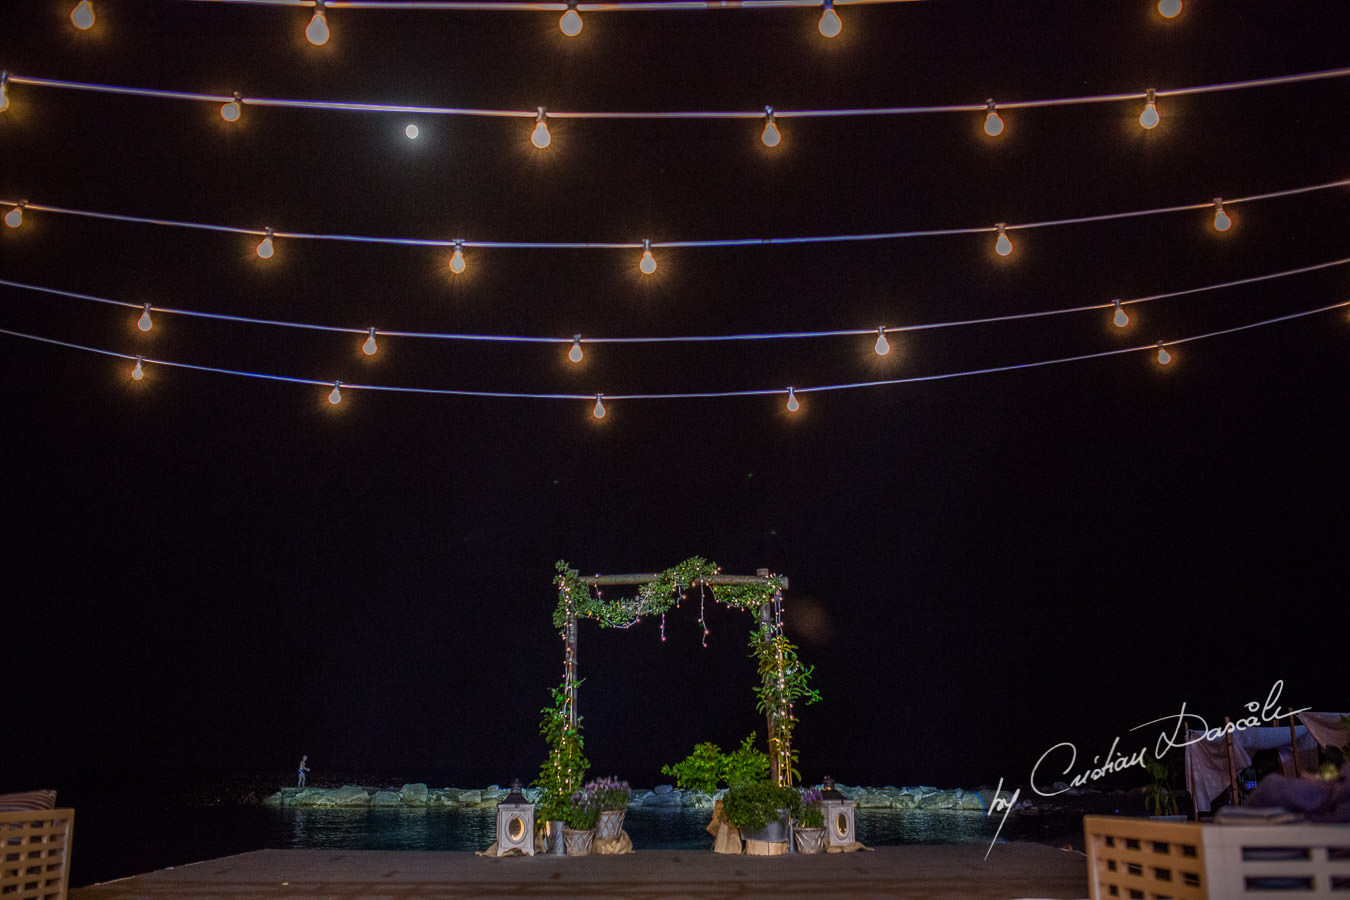 Wedding venue details by night captured during a wedding photography at the Lighthouse Limassol, by Cyprus Photographer Cristian Dascalu.